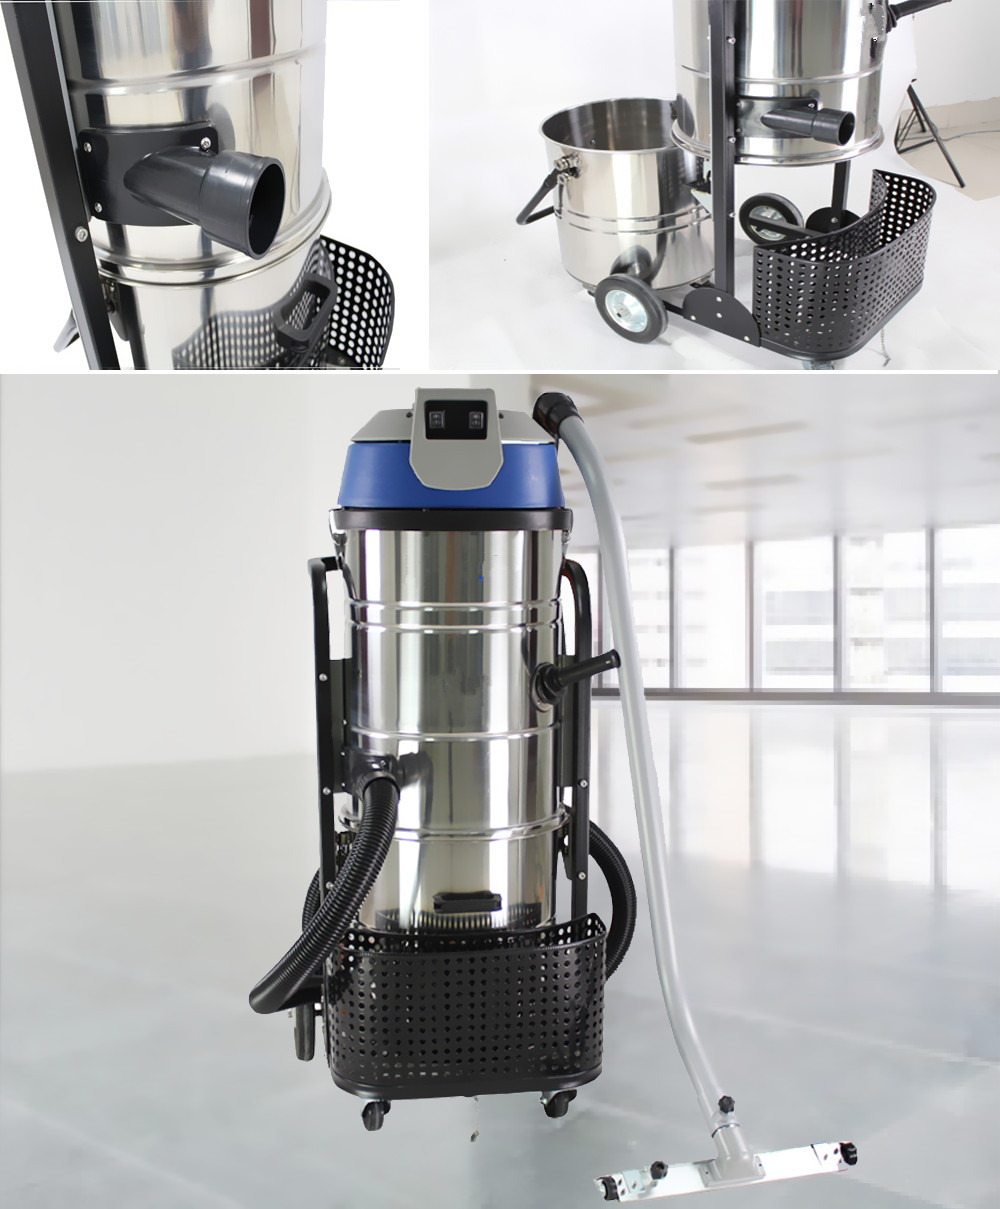 Carpet cleaning equipment for sale with-Buy Wet Dry Vacuum Cleaner,Vacuum Cleaner,Industrial Vacuum Cleaner,Dry Vacuum Cleaner,Industrial Floor Vacuum Cleaners,Industrial Dust Cleaner